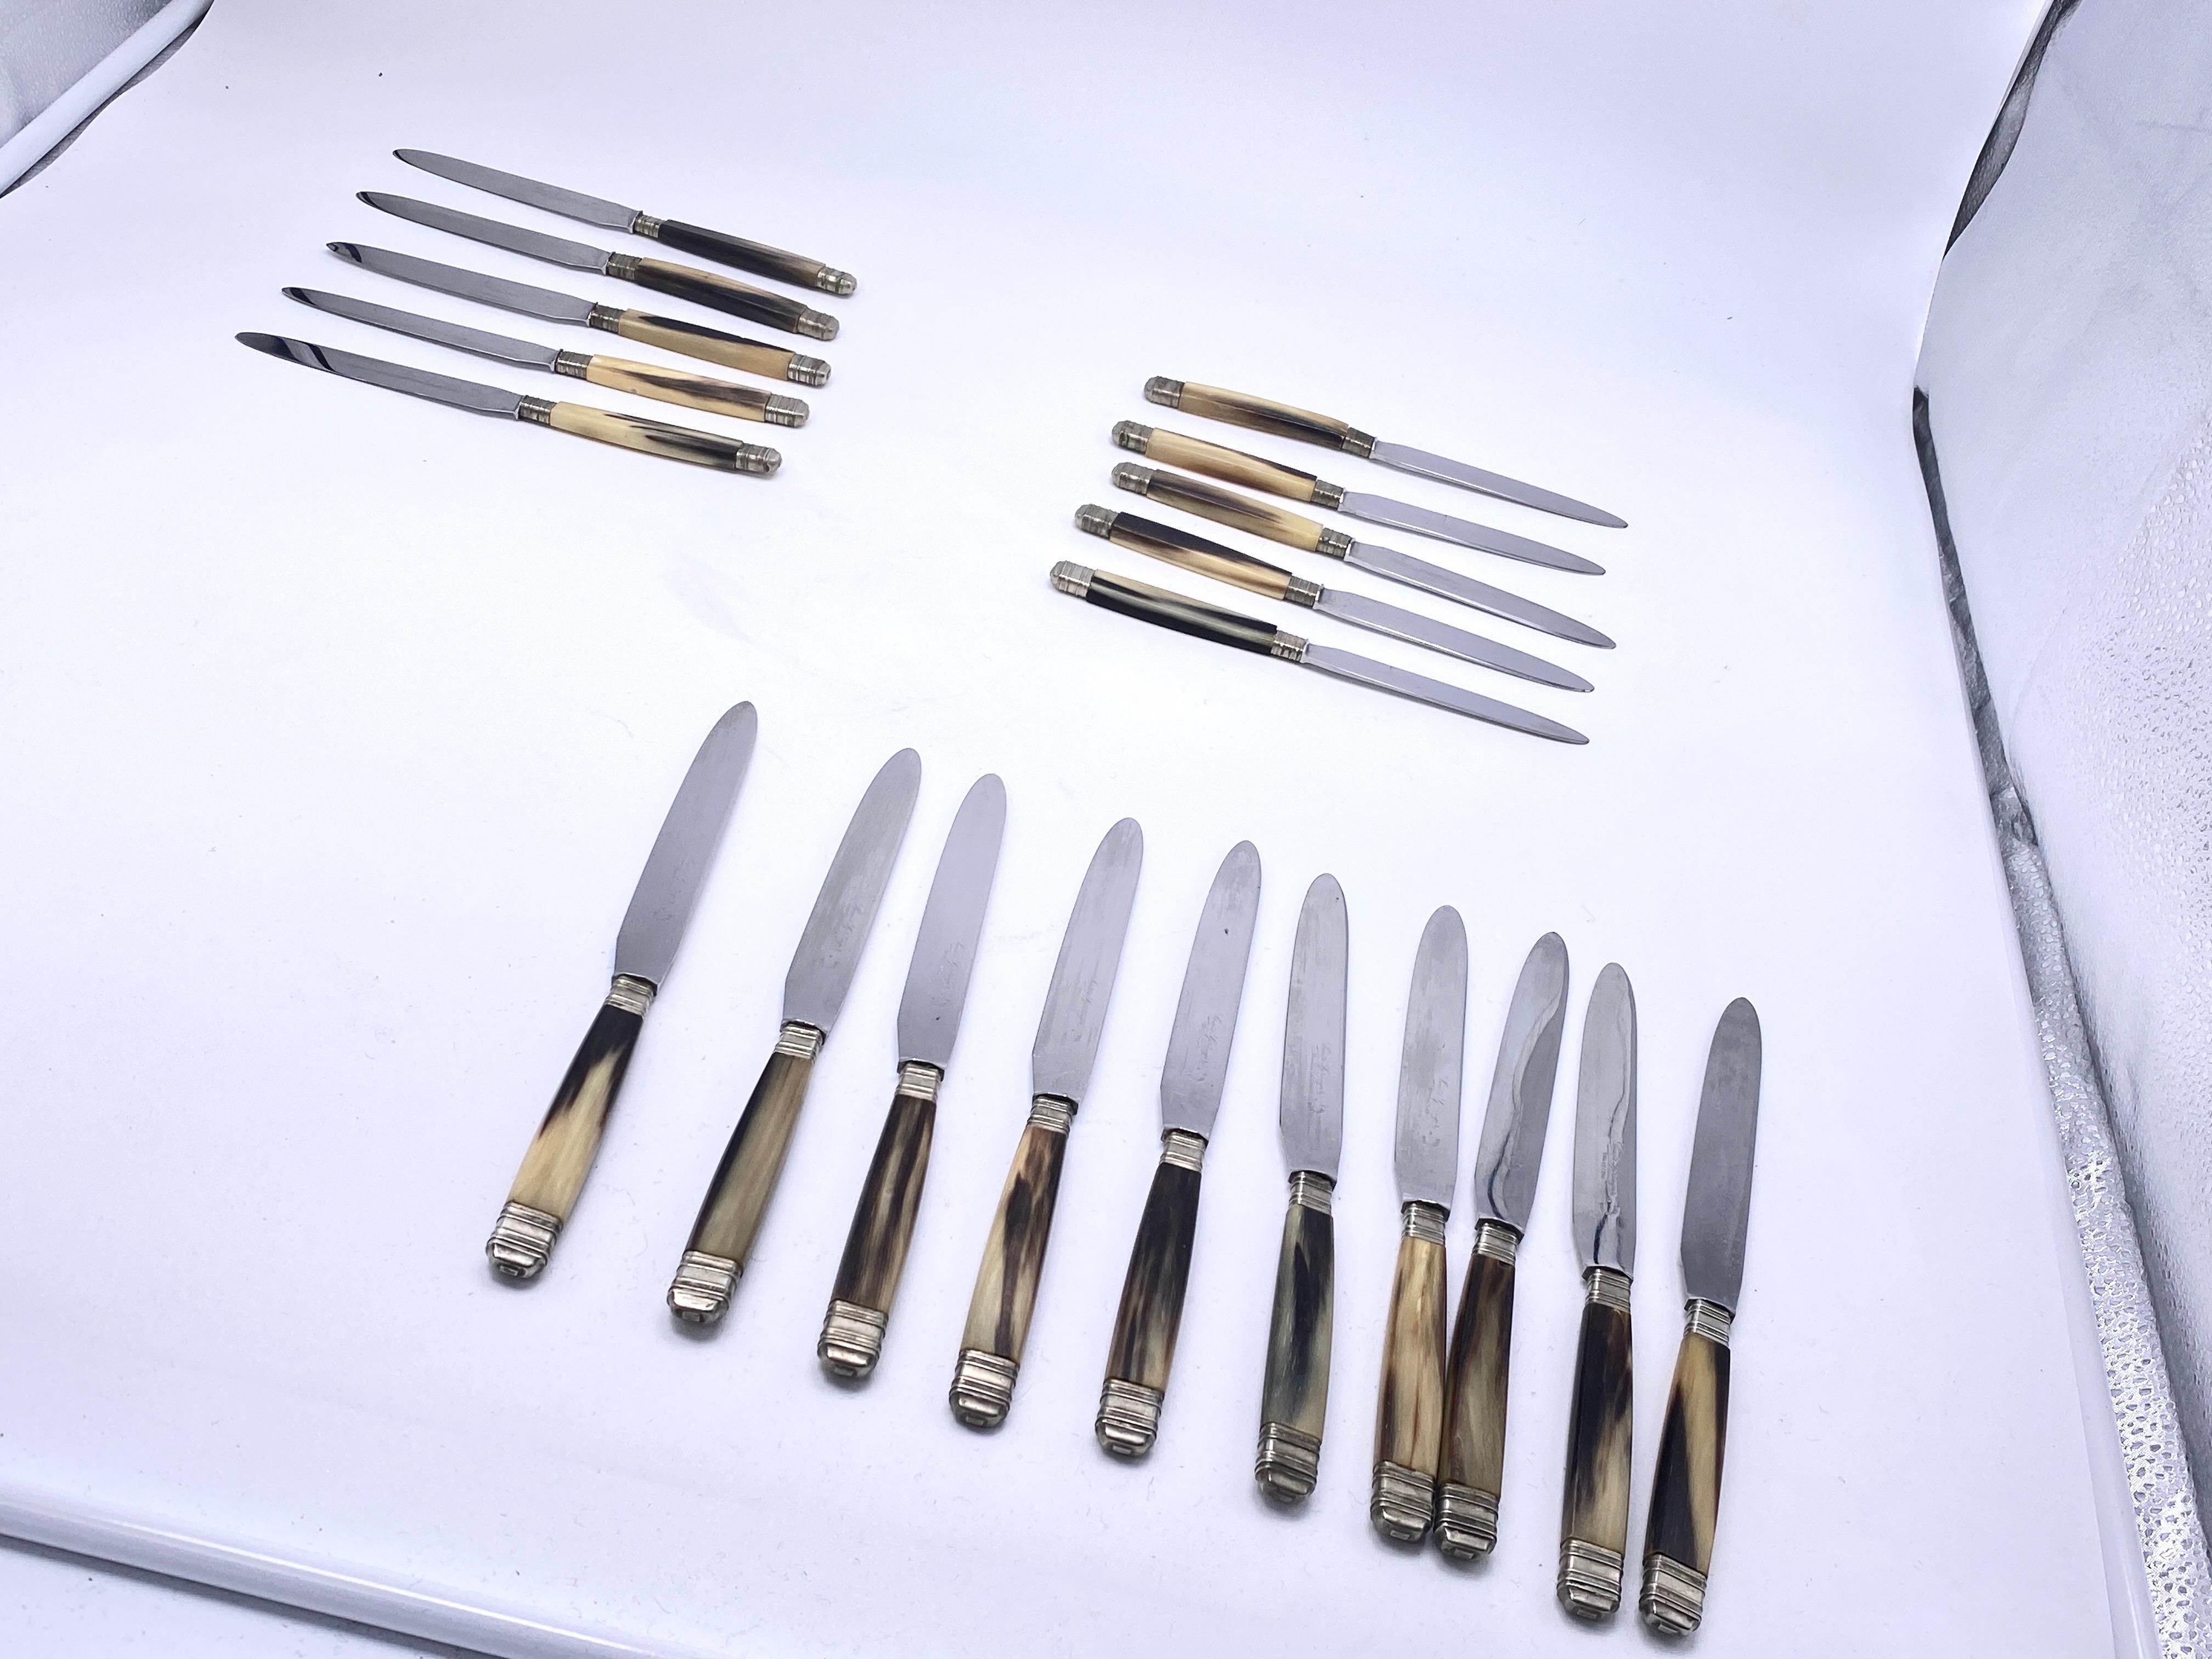 Cutlery set of 20 Dinner knifes, in horn and Metal. France circa 1970.